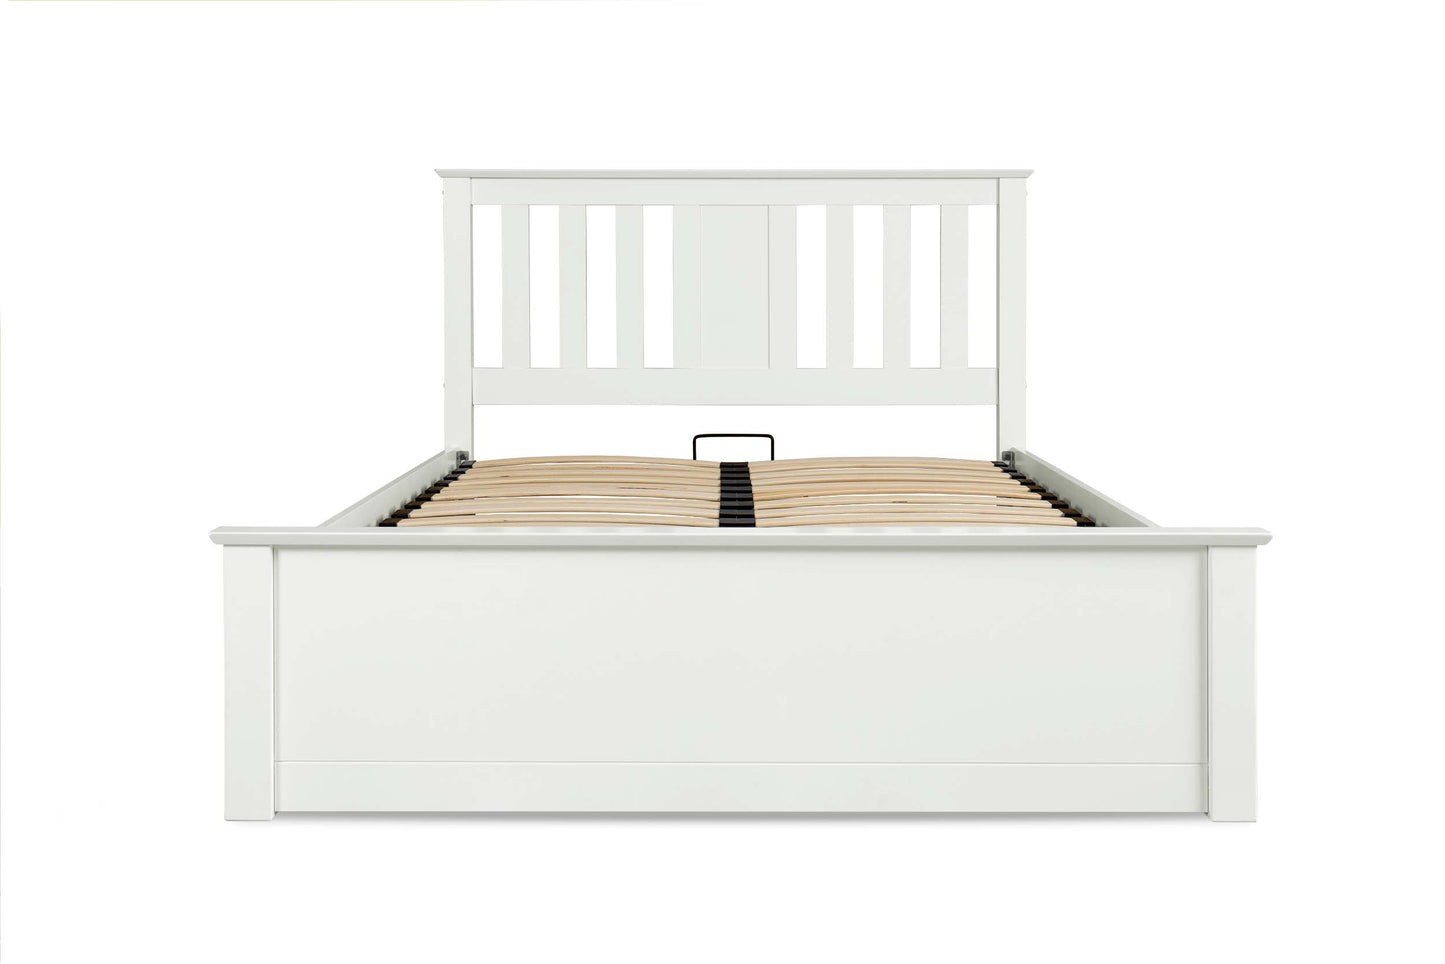 Chesterfield Ottoman Storage Bed Frame - 5ft King Size - Bright White